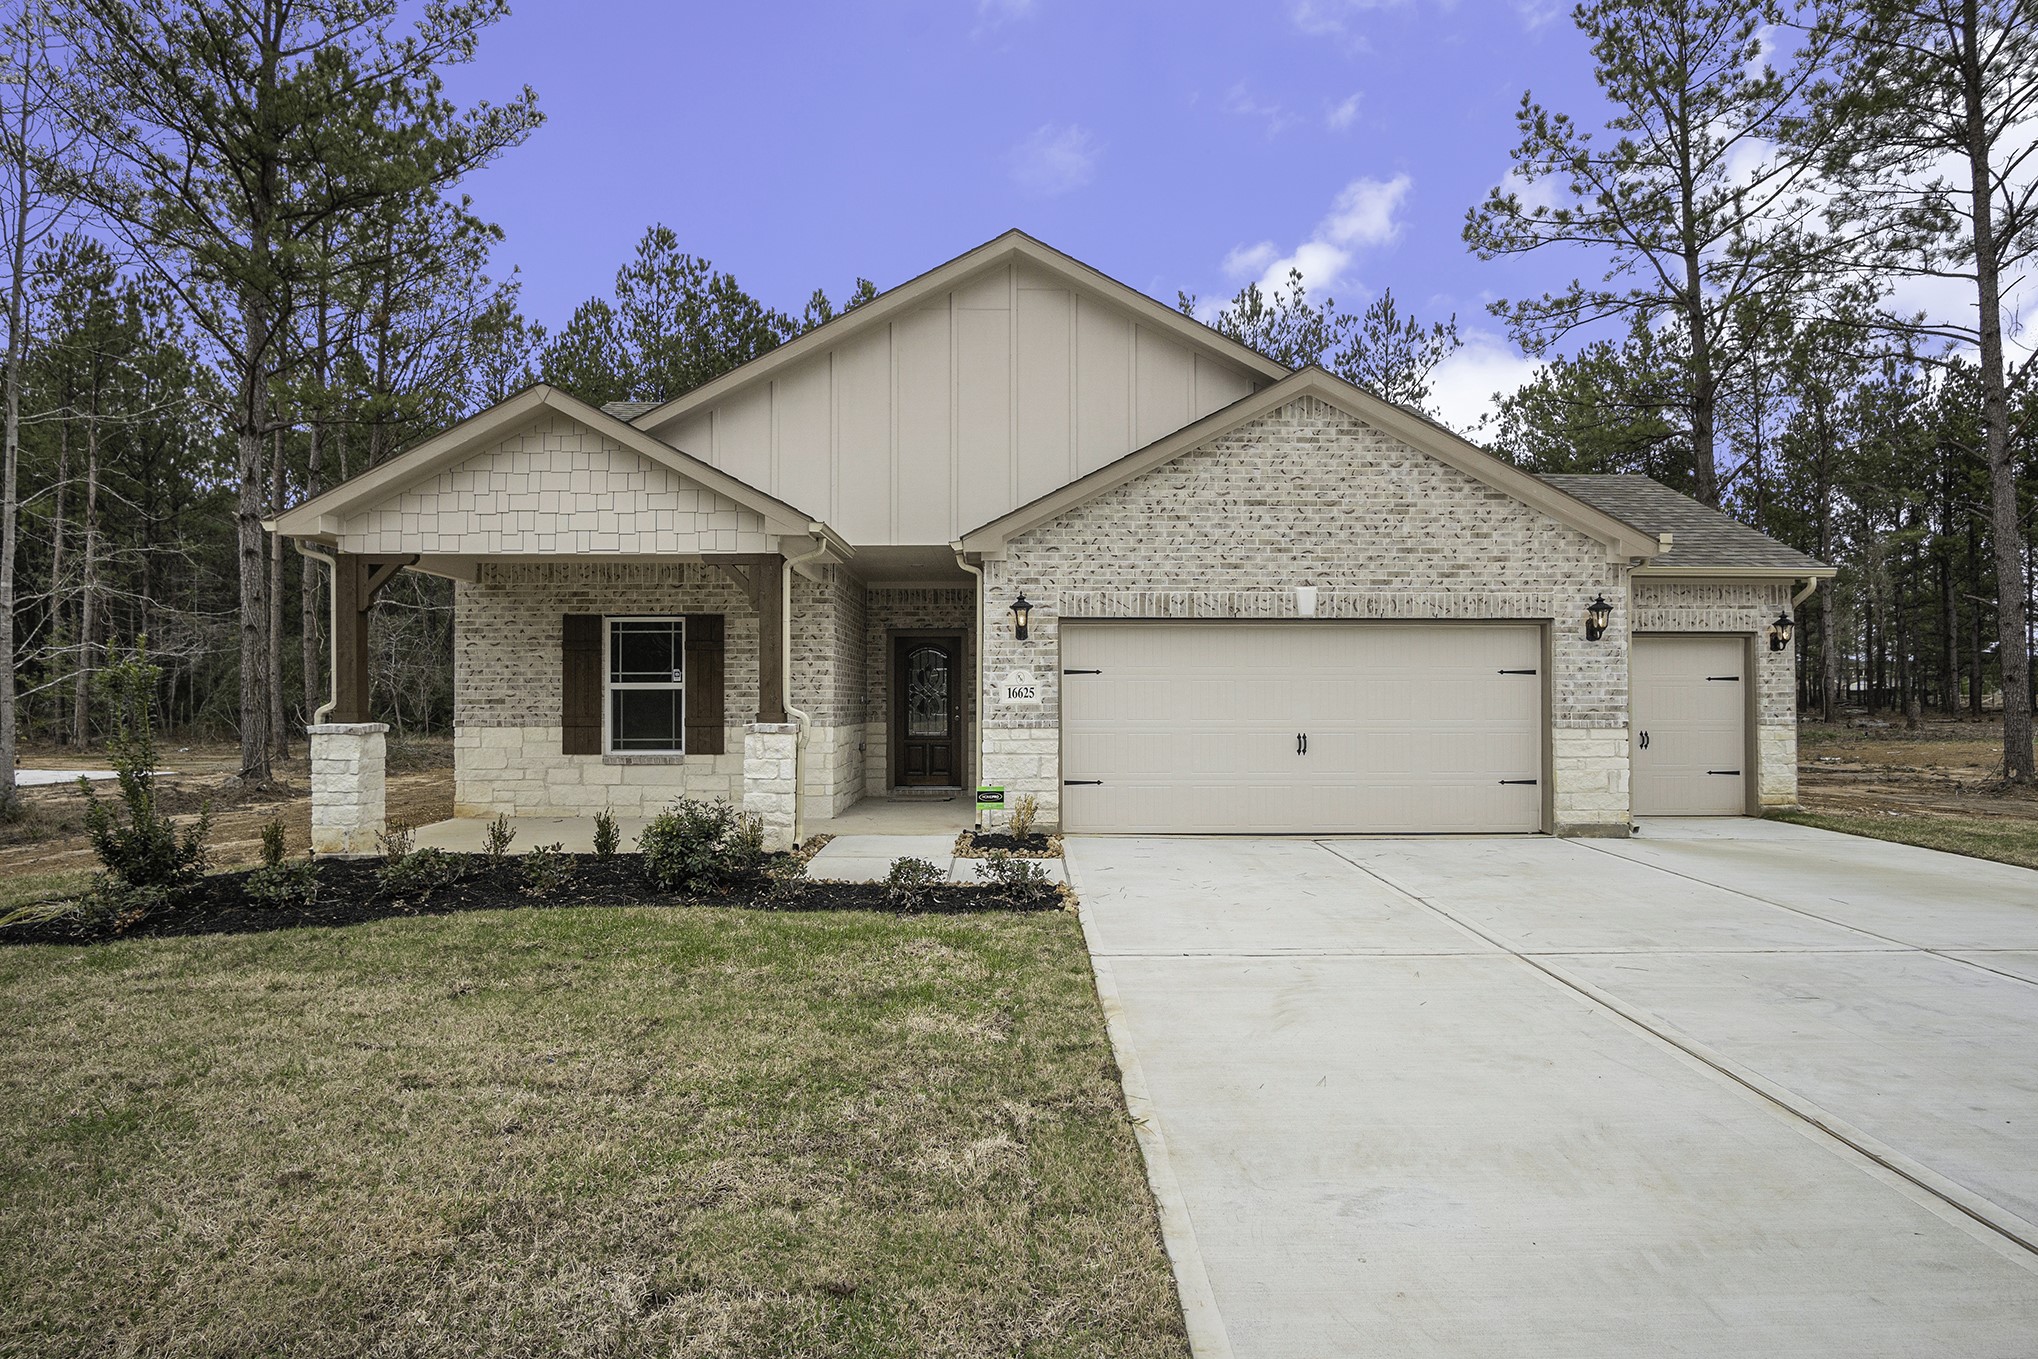 Fabulous New 1 story home on over 1 Acre Lot! Grayson Plan!  Hurry call and schedule your appointment today!